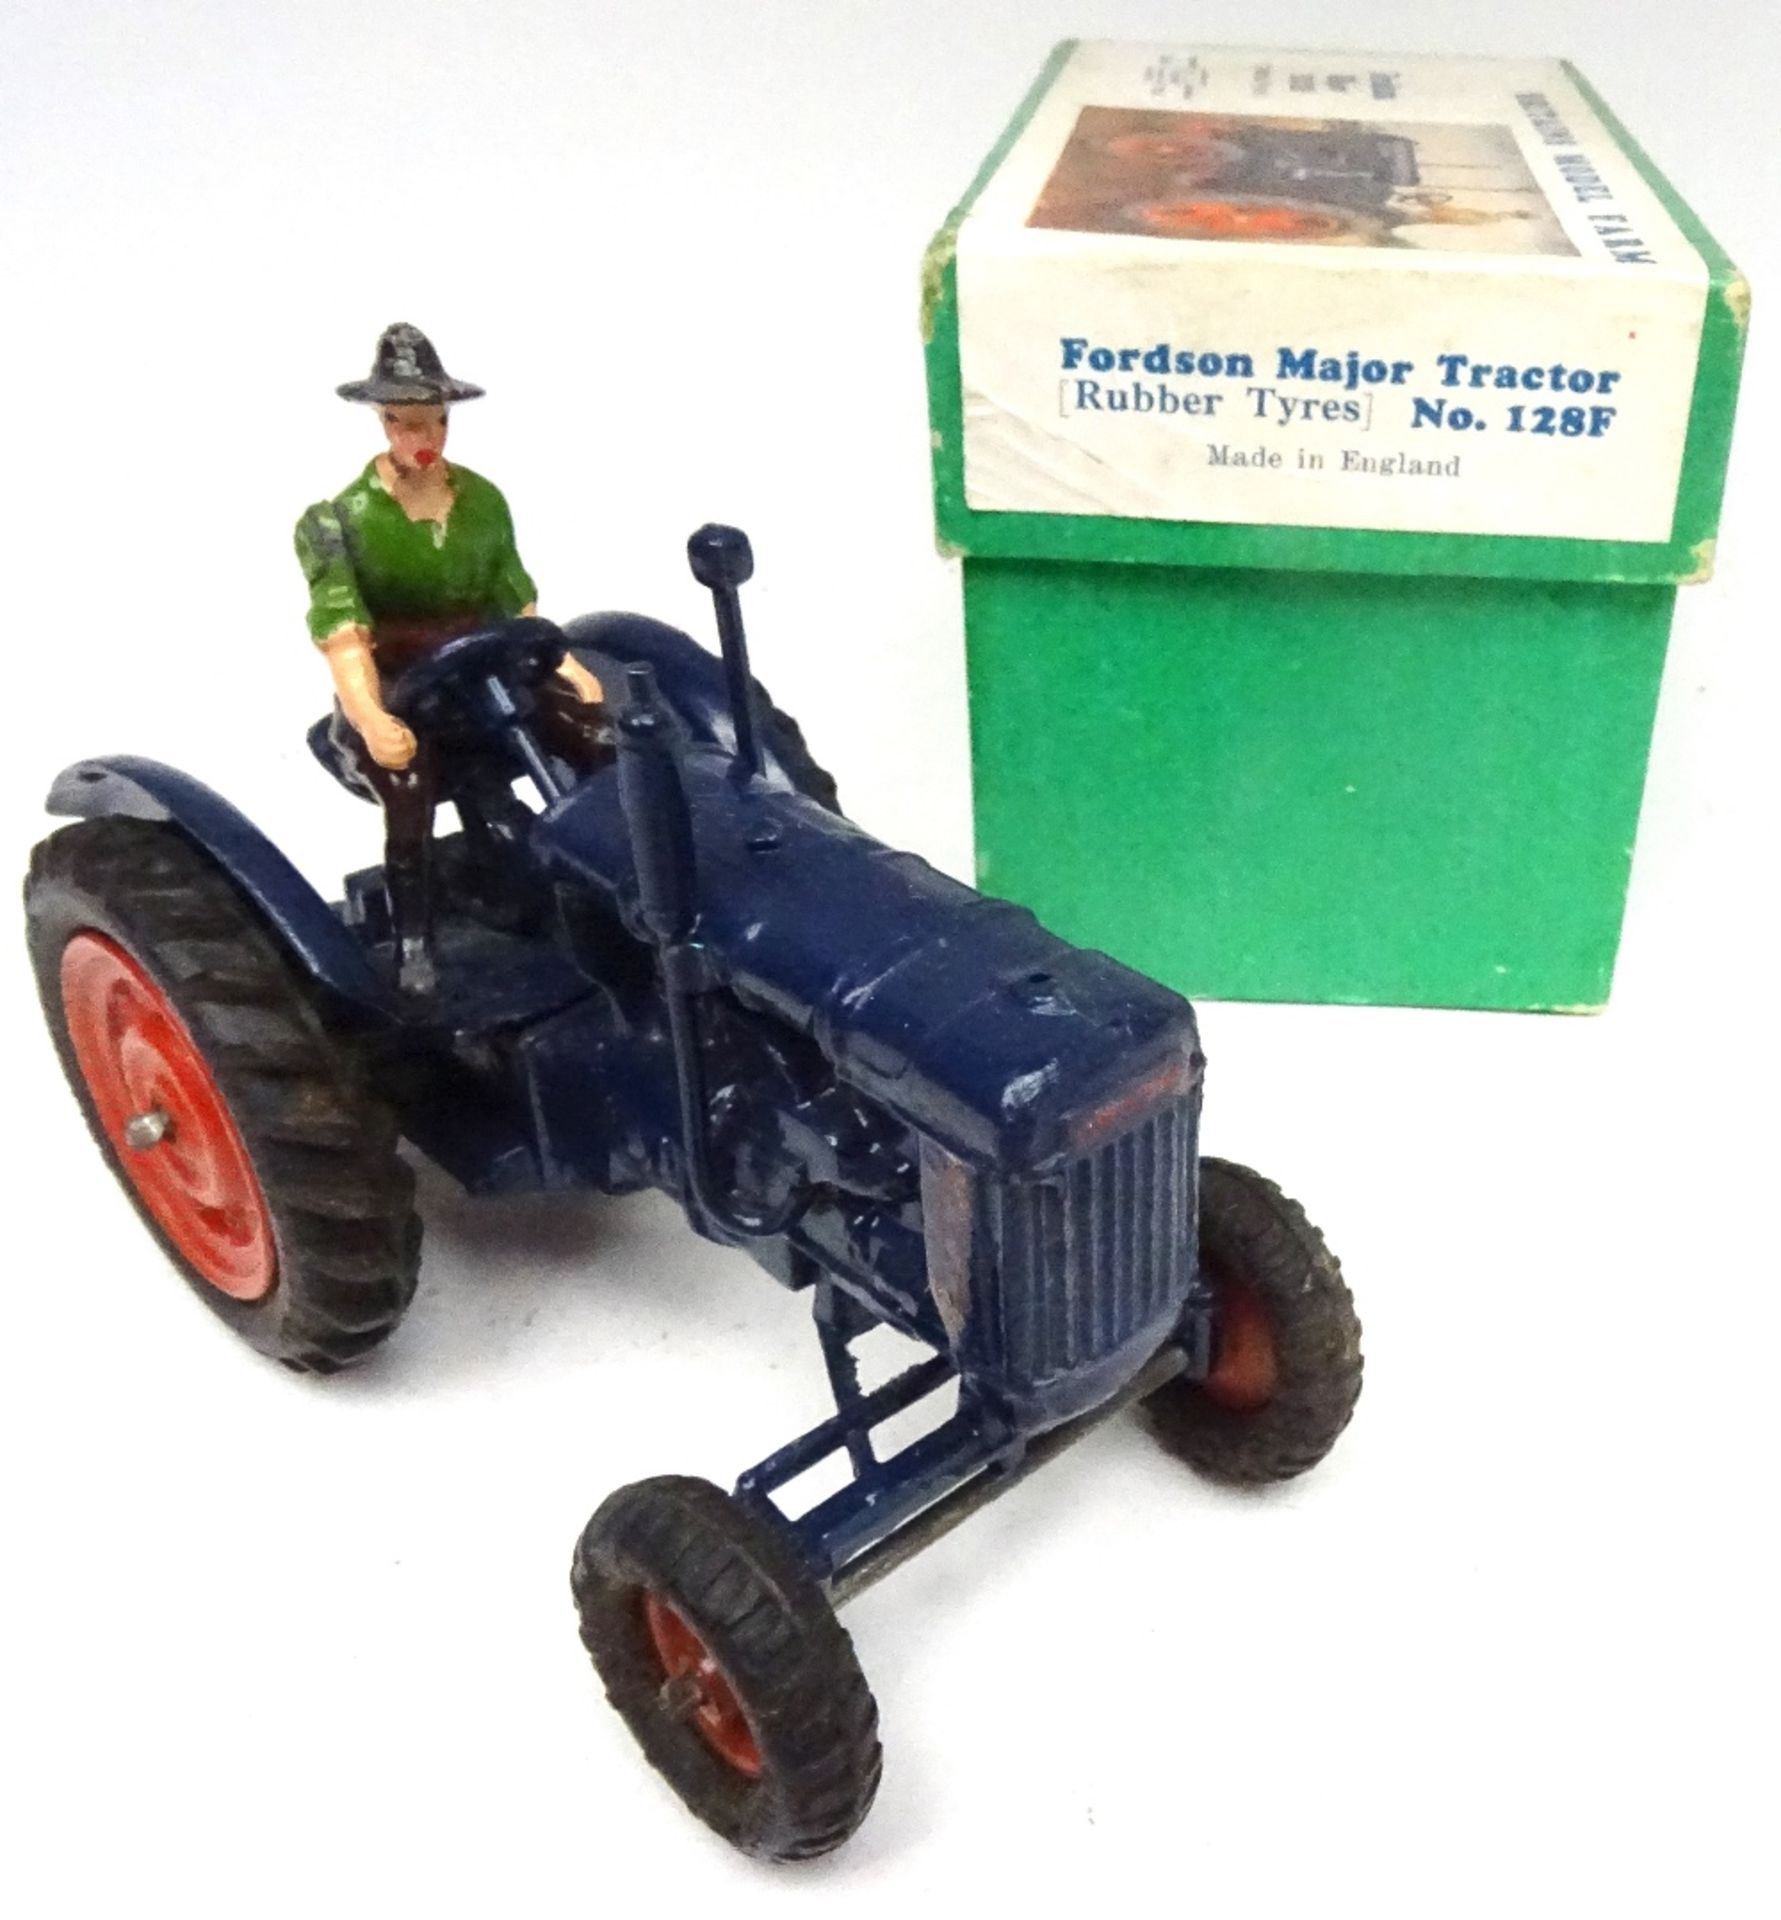 Britains set 128F Fordson Major Tractor - Image 2 of 4